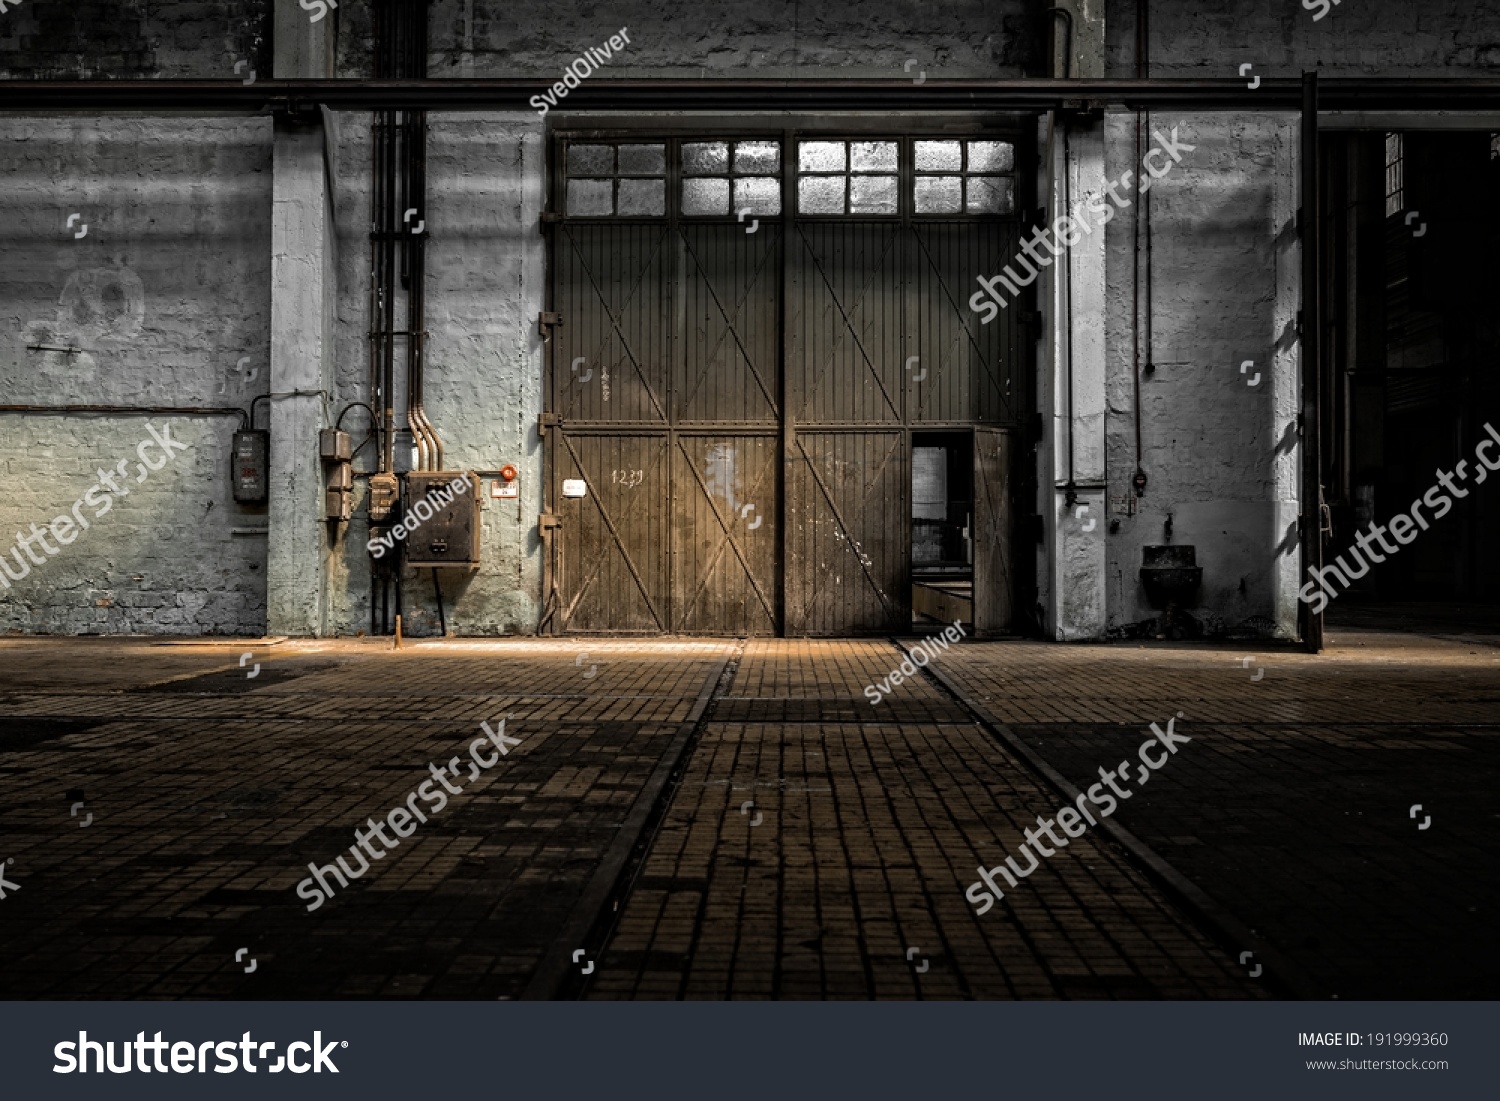 Industrial interior of an old factory building #191999360